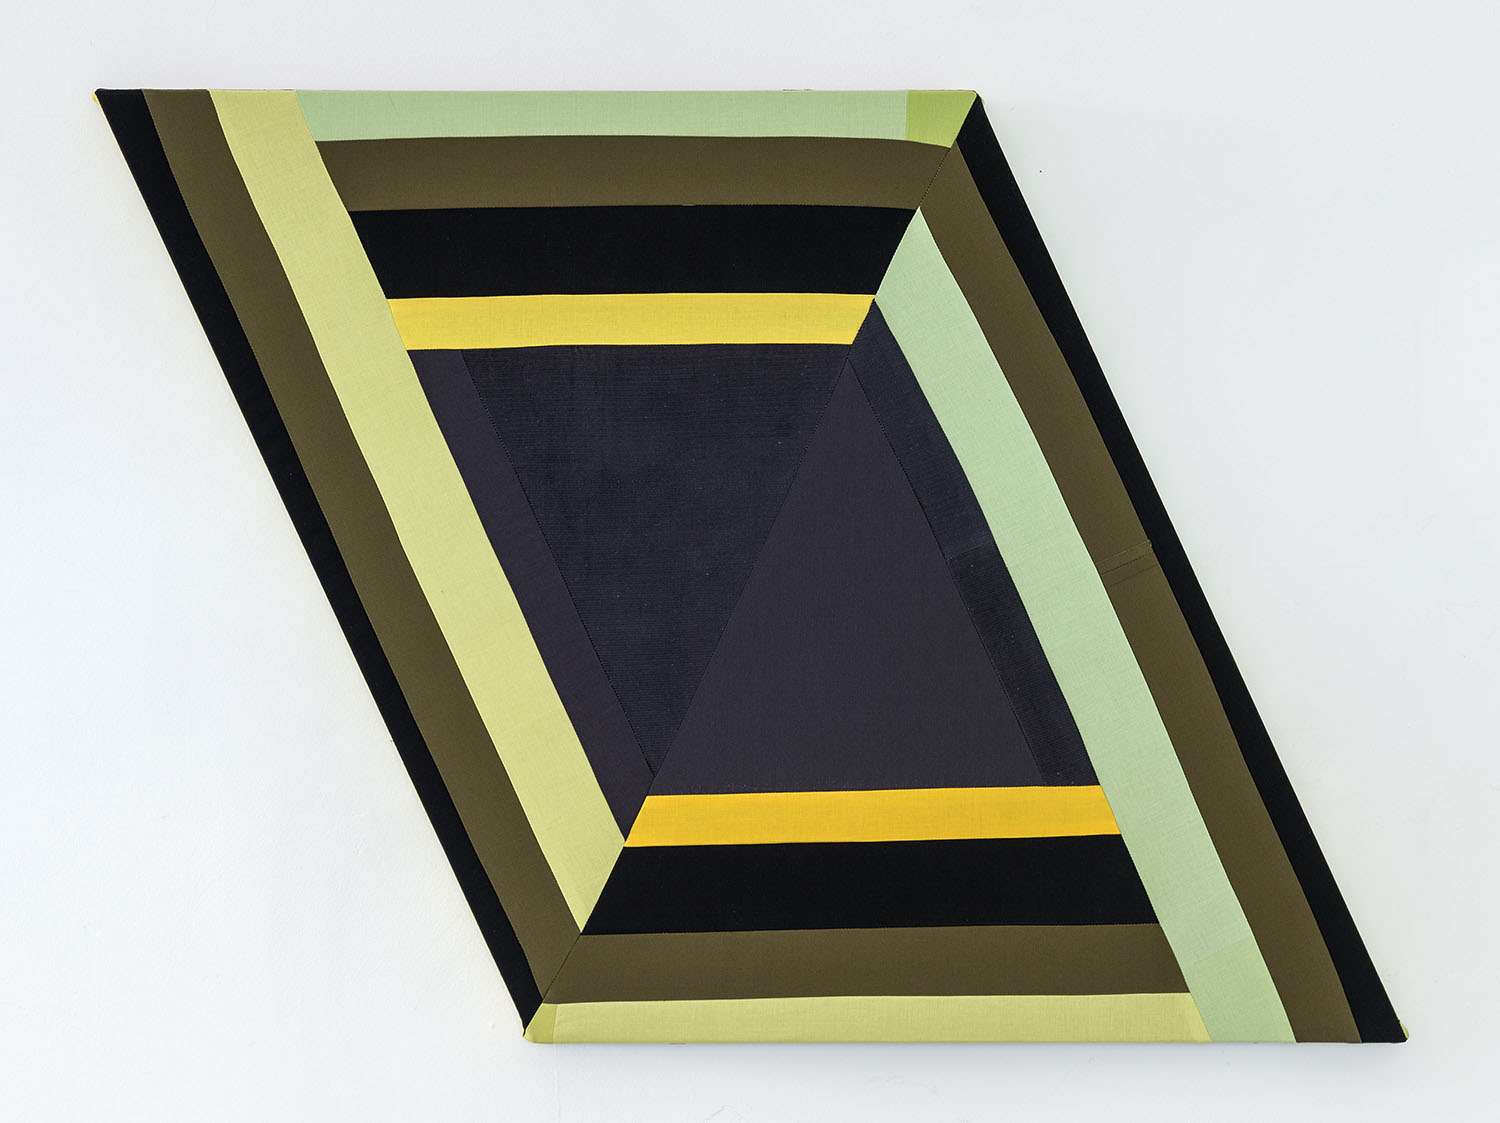    Know Wrong Angles   ,  2019 Sewn cotton, corduroy and canvas on shaped support 25 x 34.5 inches overall (63.5 x 87.6 cm overall) 